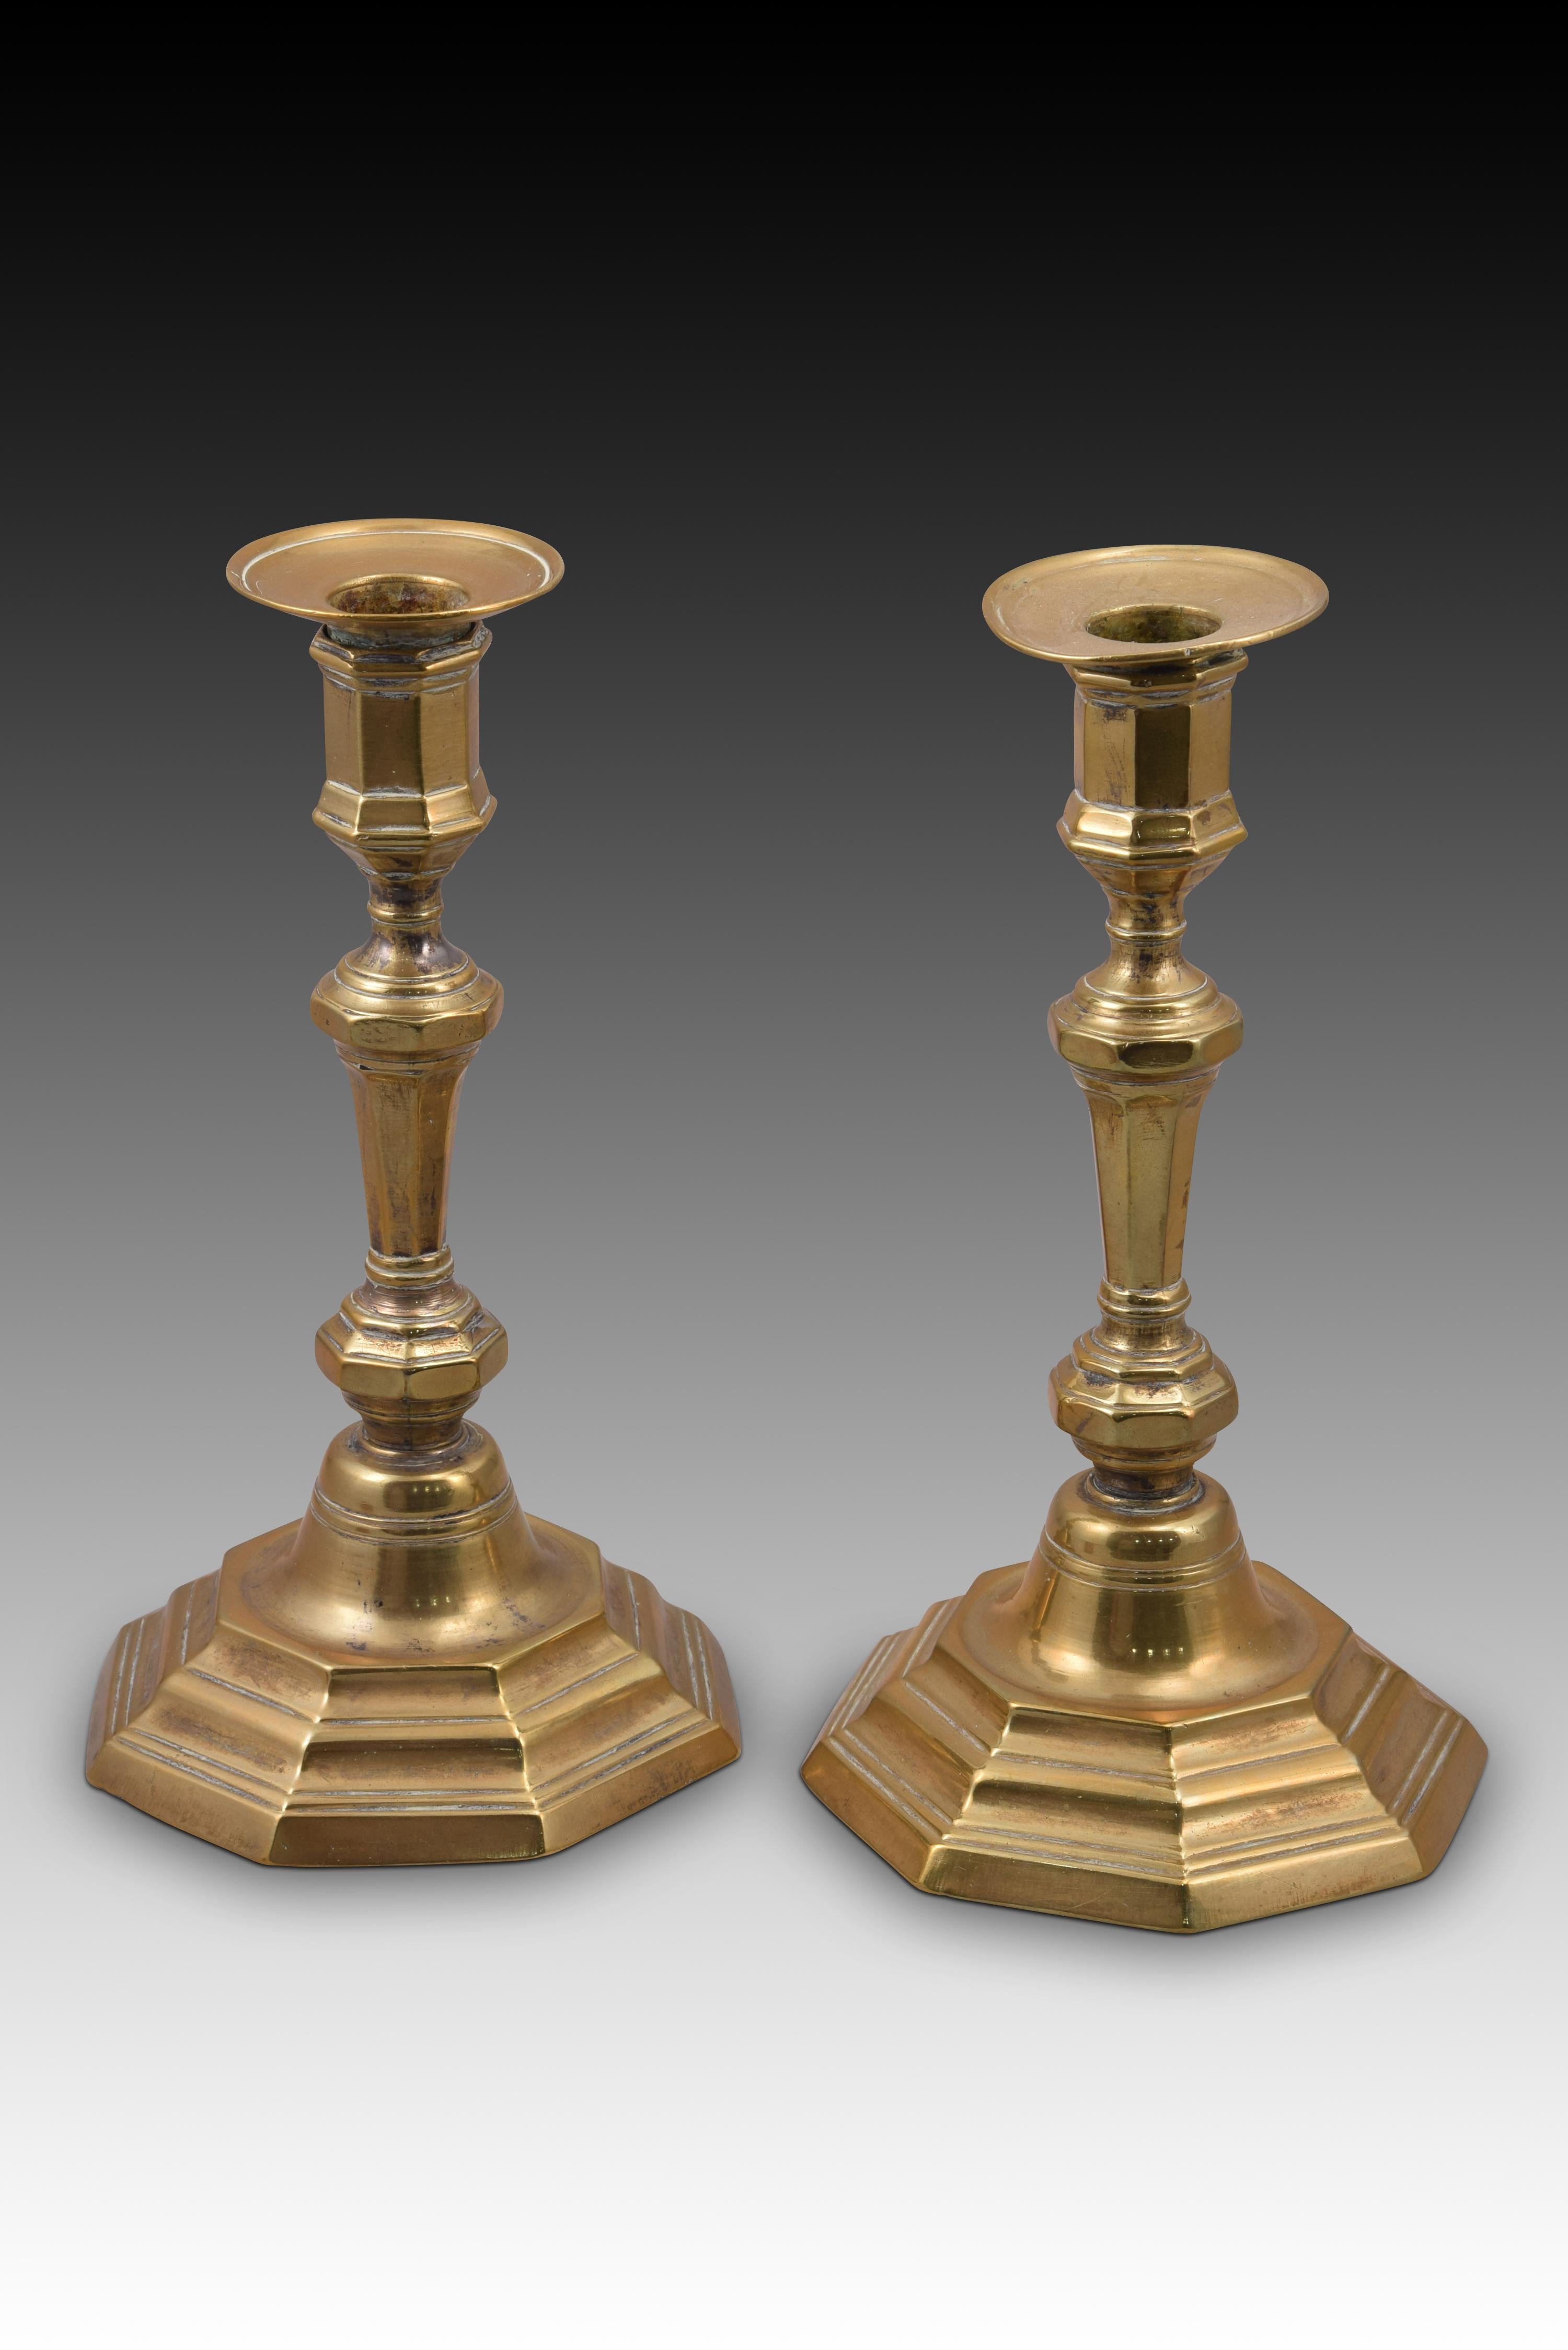 Neoclassical Pair of candlesticks or candle holders. Bronze. 18th century. For Sale